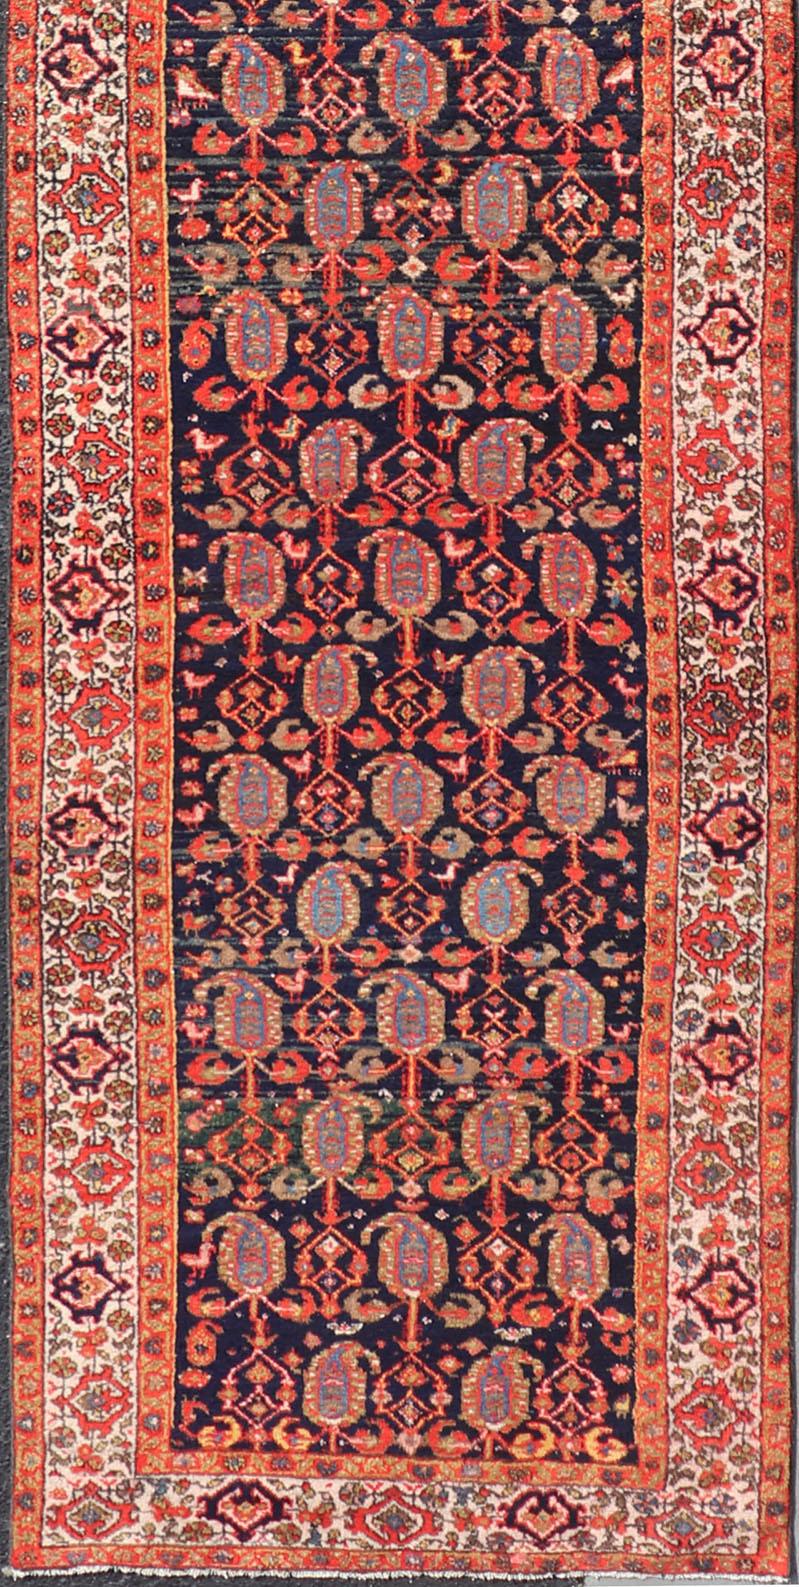 Measures: 3'3 x 15'2.

This 1920's Persian Hamadan runner features vivid shades of navy, blue, red-orange, green and small accents and ivory. The field design is a unique paisley motif design scattering across the entirety of the field. The border